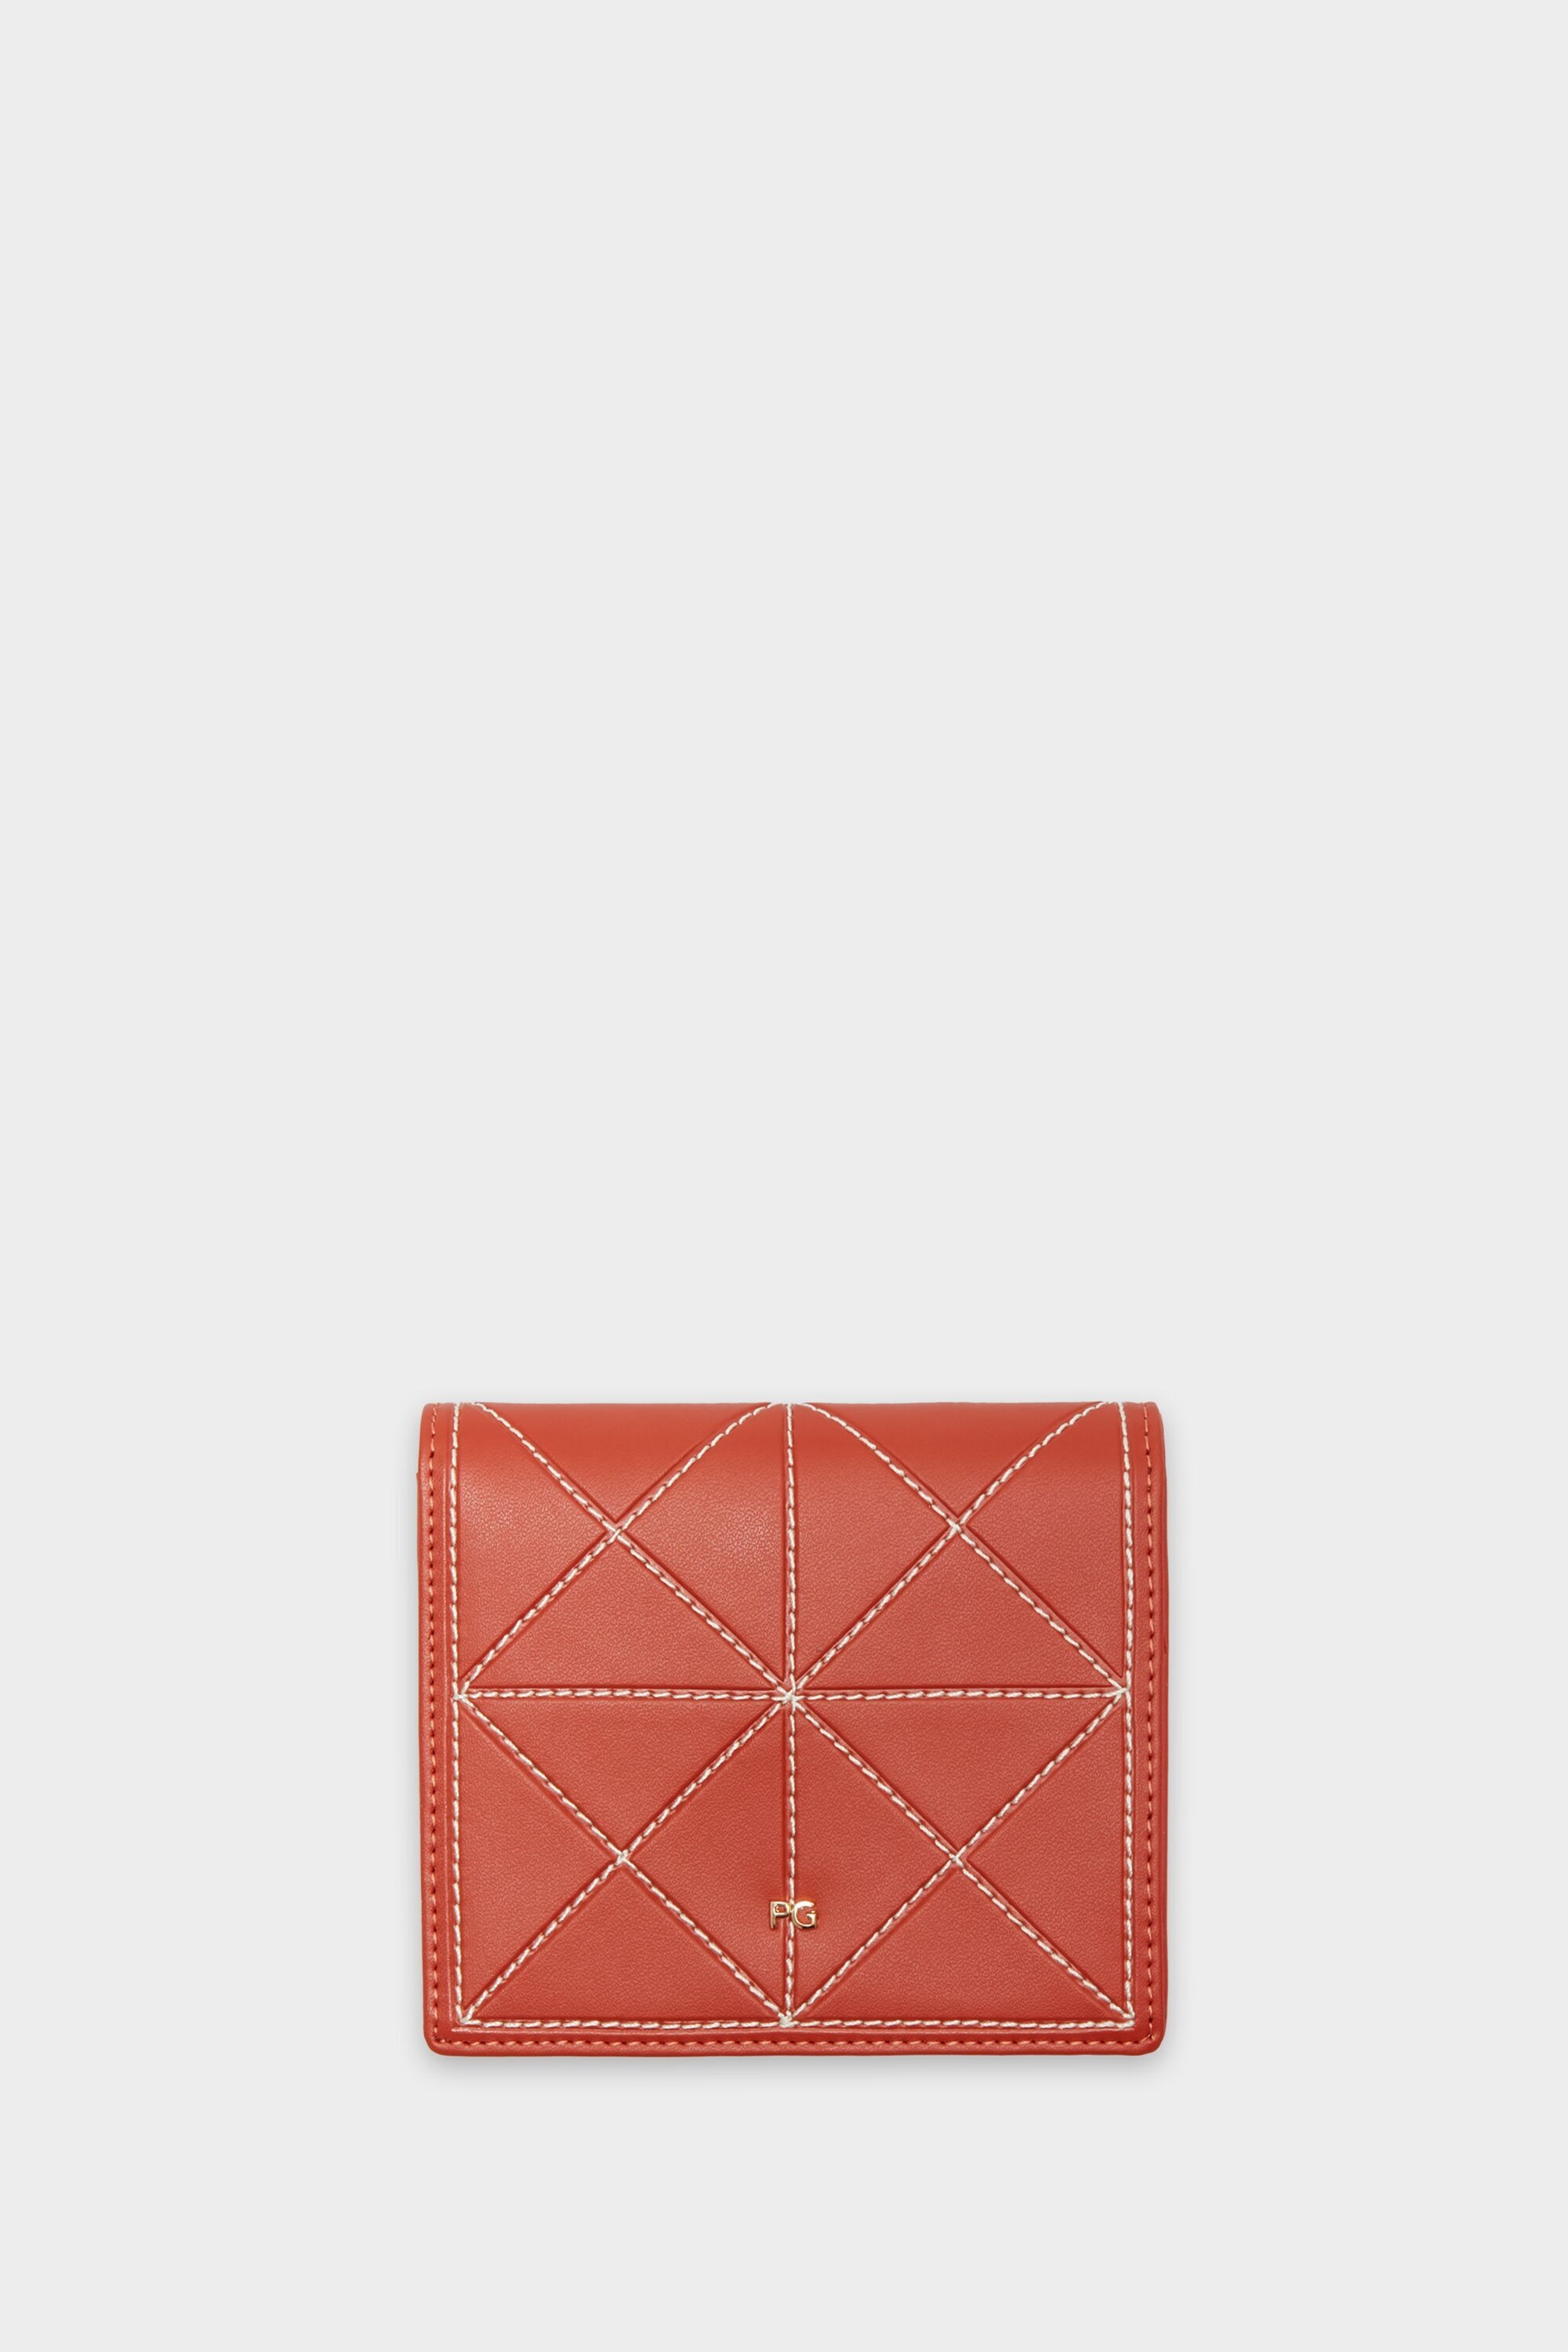 Origami Japanese wallet